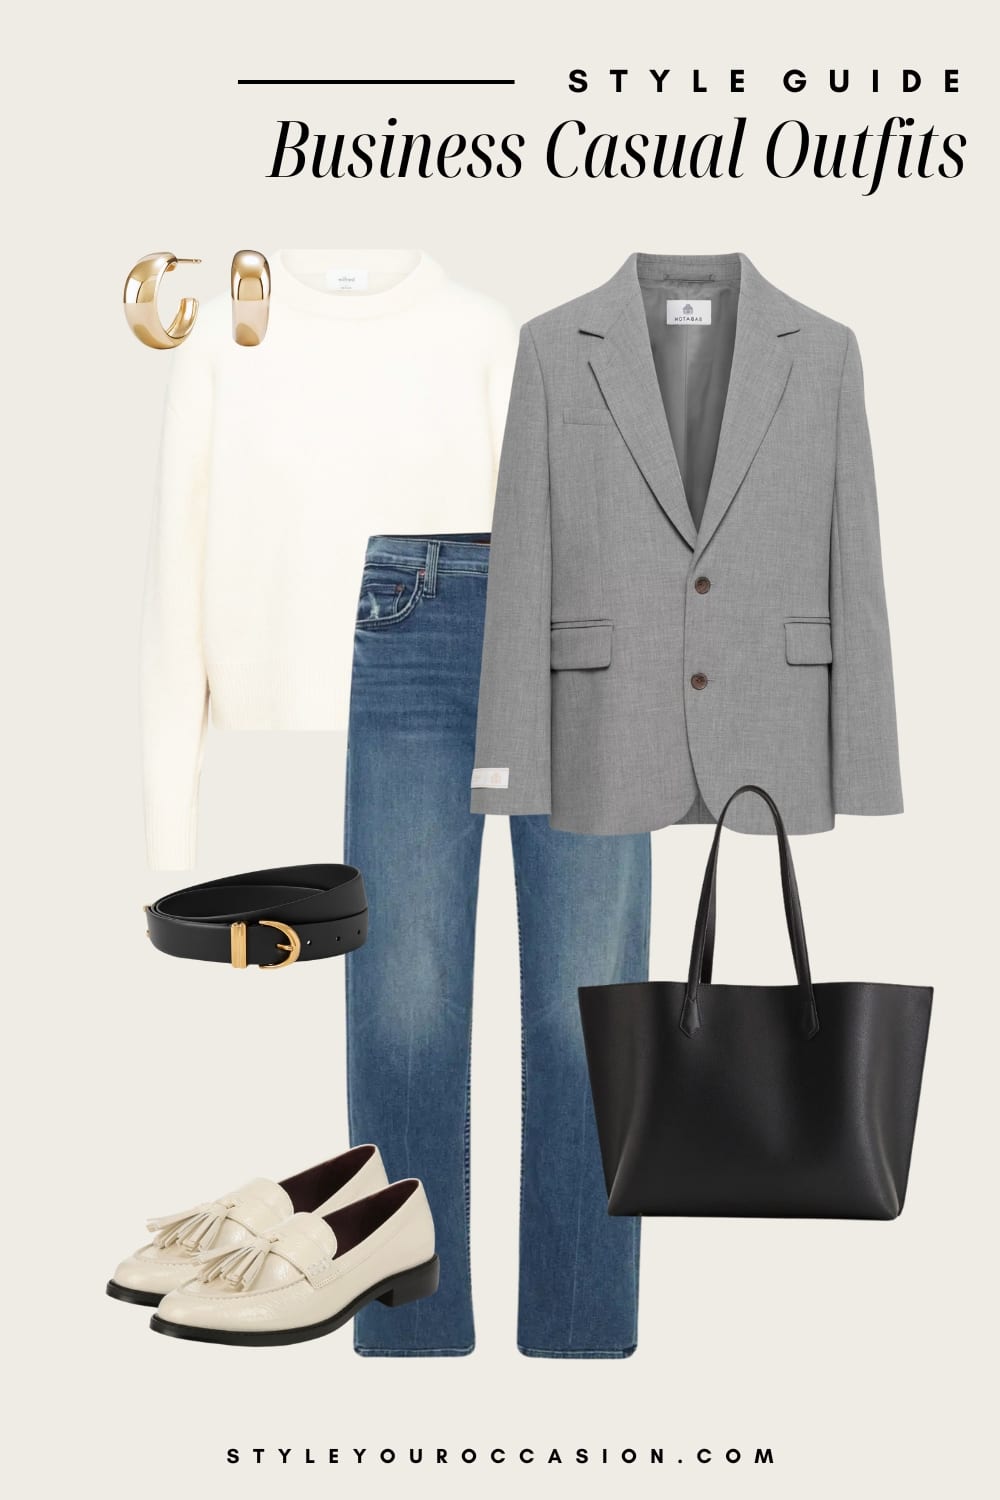 an image board of a business casual outfit featuring blue jeans, a white crewneck sweater, a light grey blazer, cream loafers with fringe details, and black and gold accessories